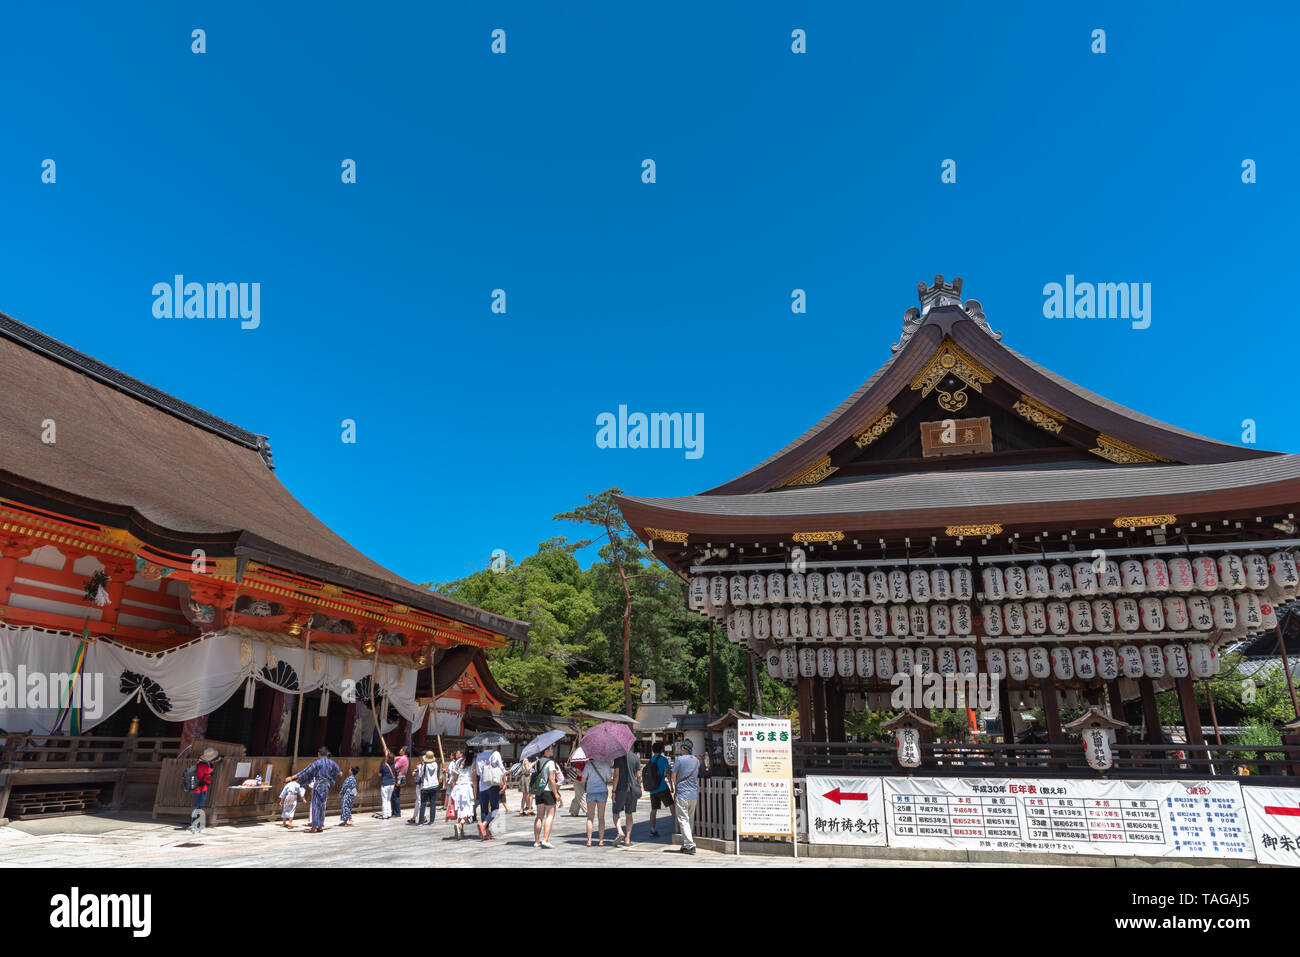 Yasaka or Gion Shrine. Yasaka Shrine is one of the most famous shrines in Kyoto between Gion District and Higashiyama District. Stock Photo